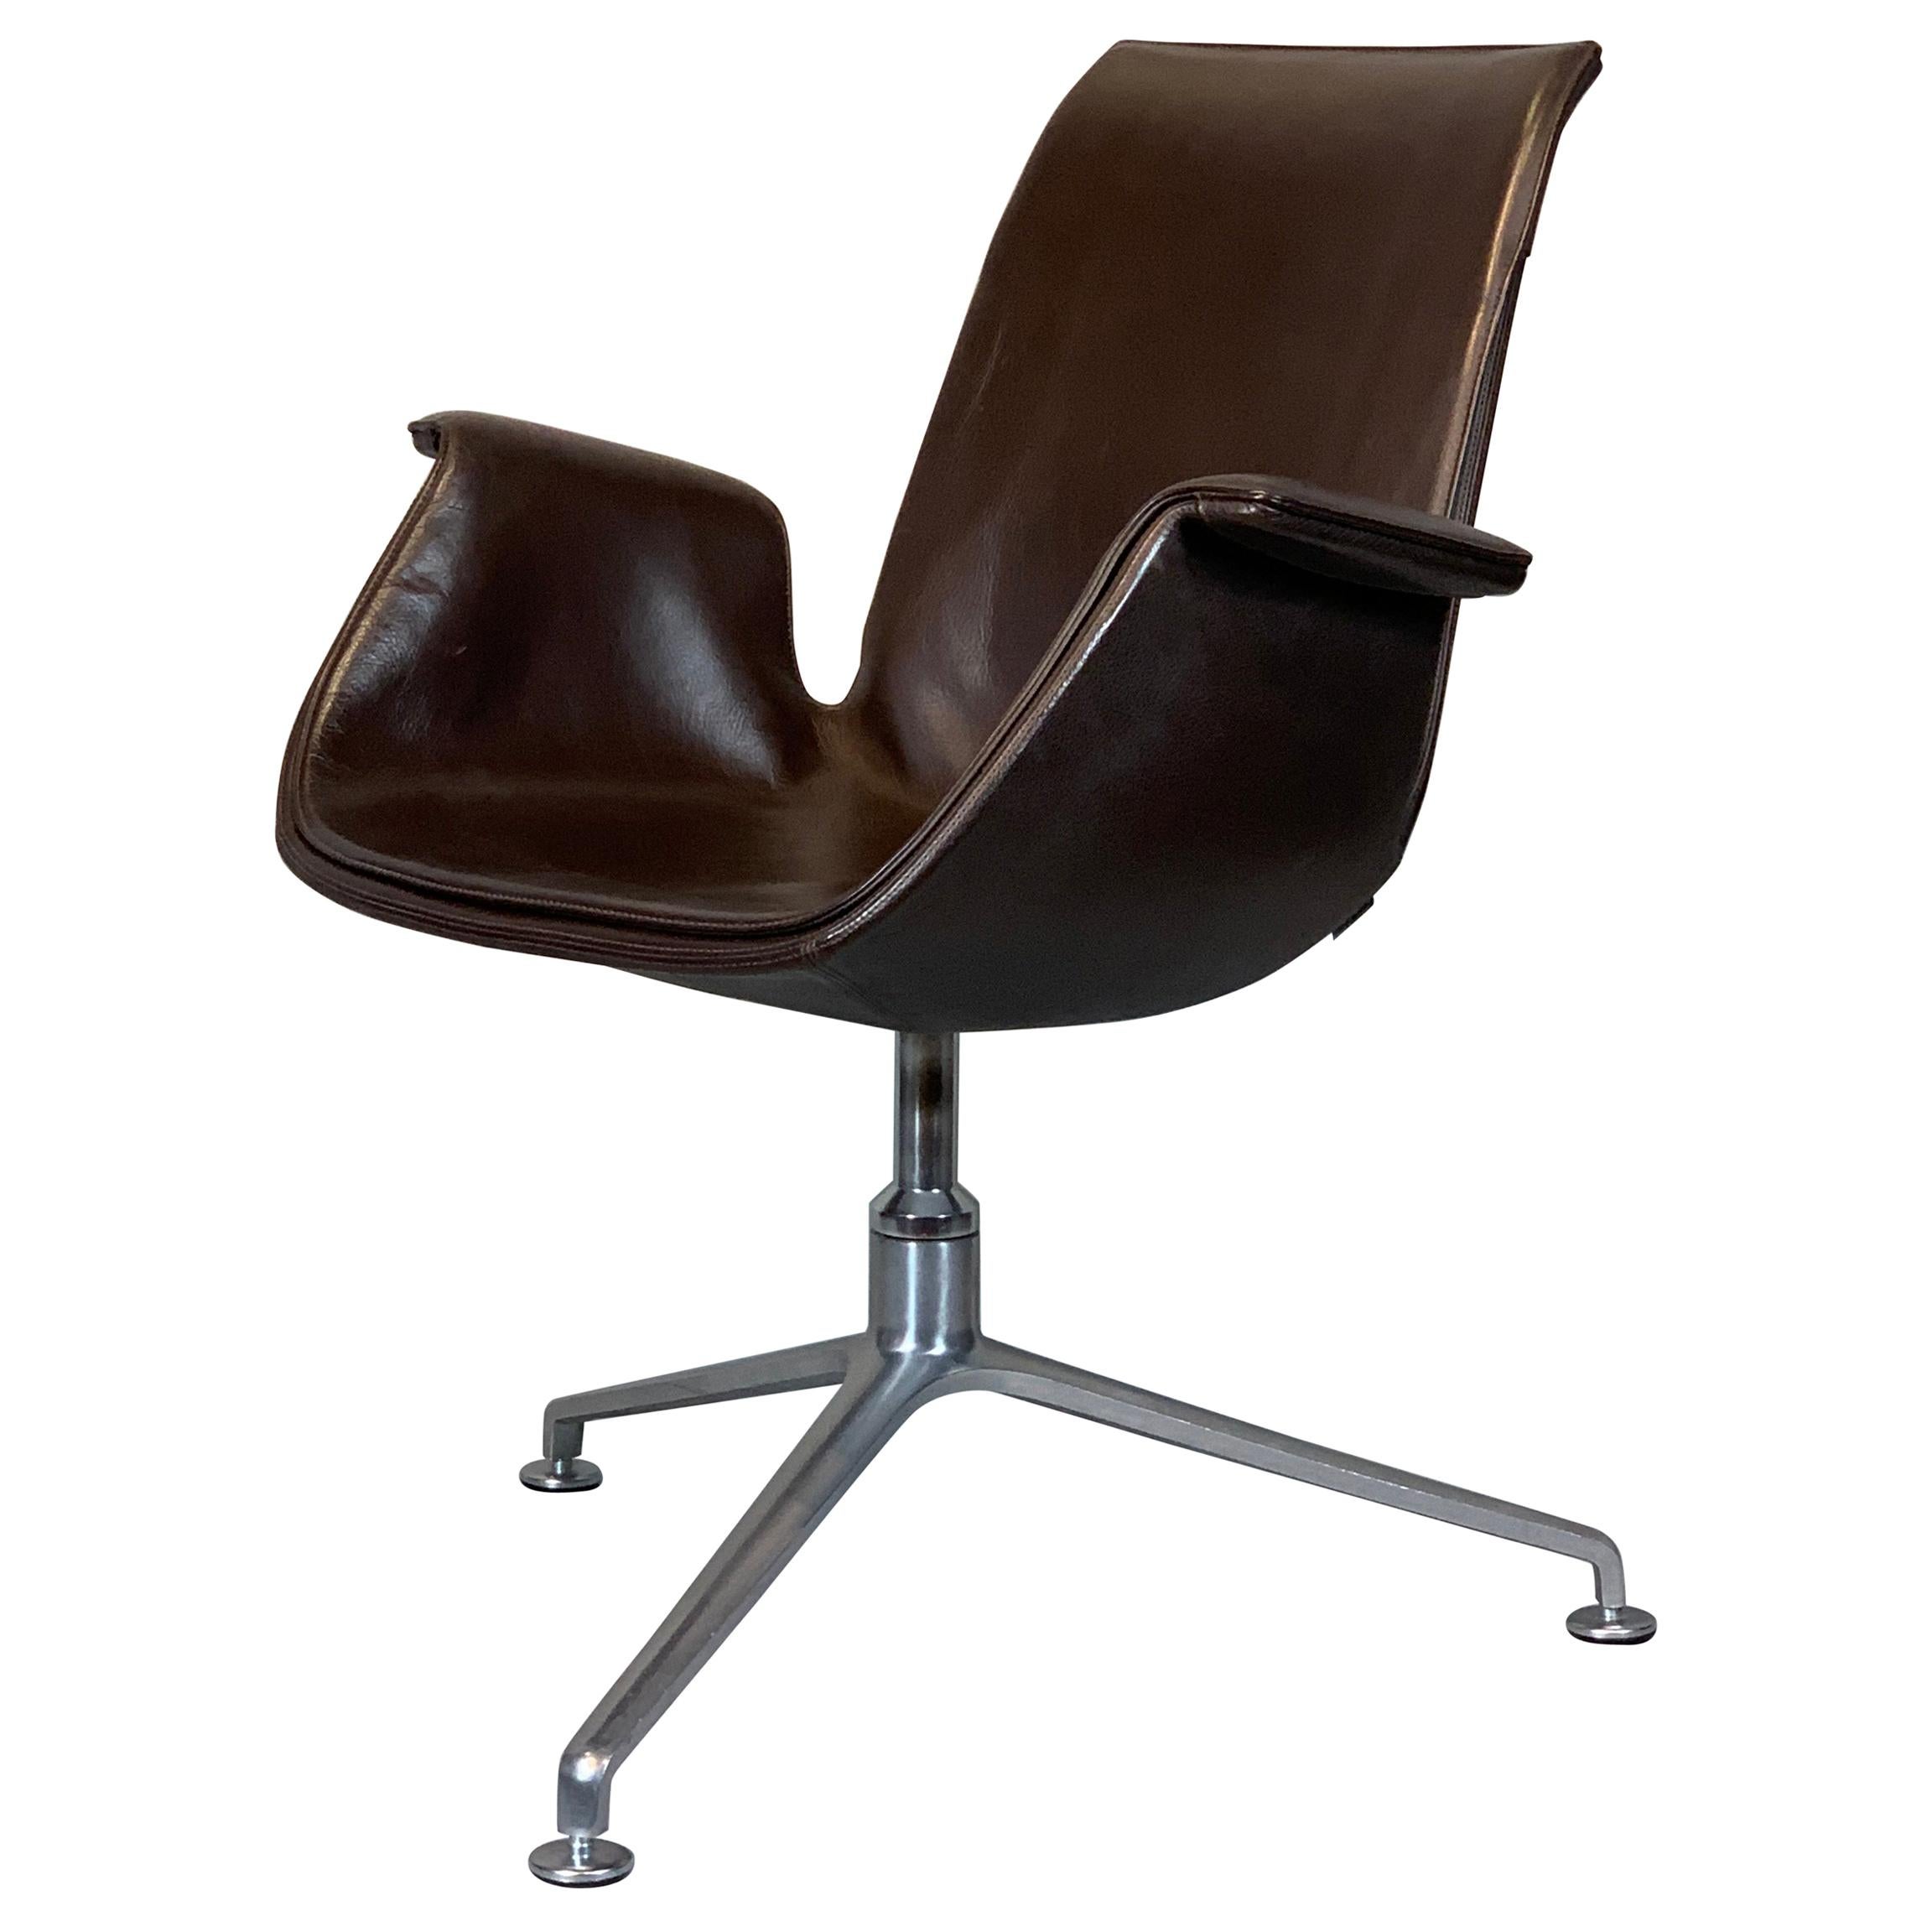 Walter Knoll / Kastholm & Fabricius FK 6725 Tulip Chair / Brown Leather